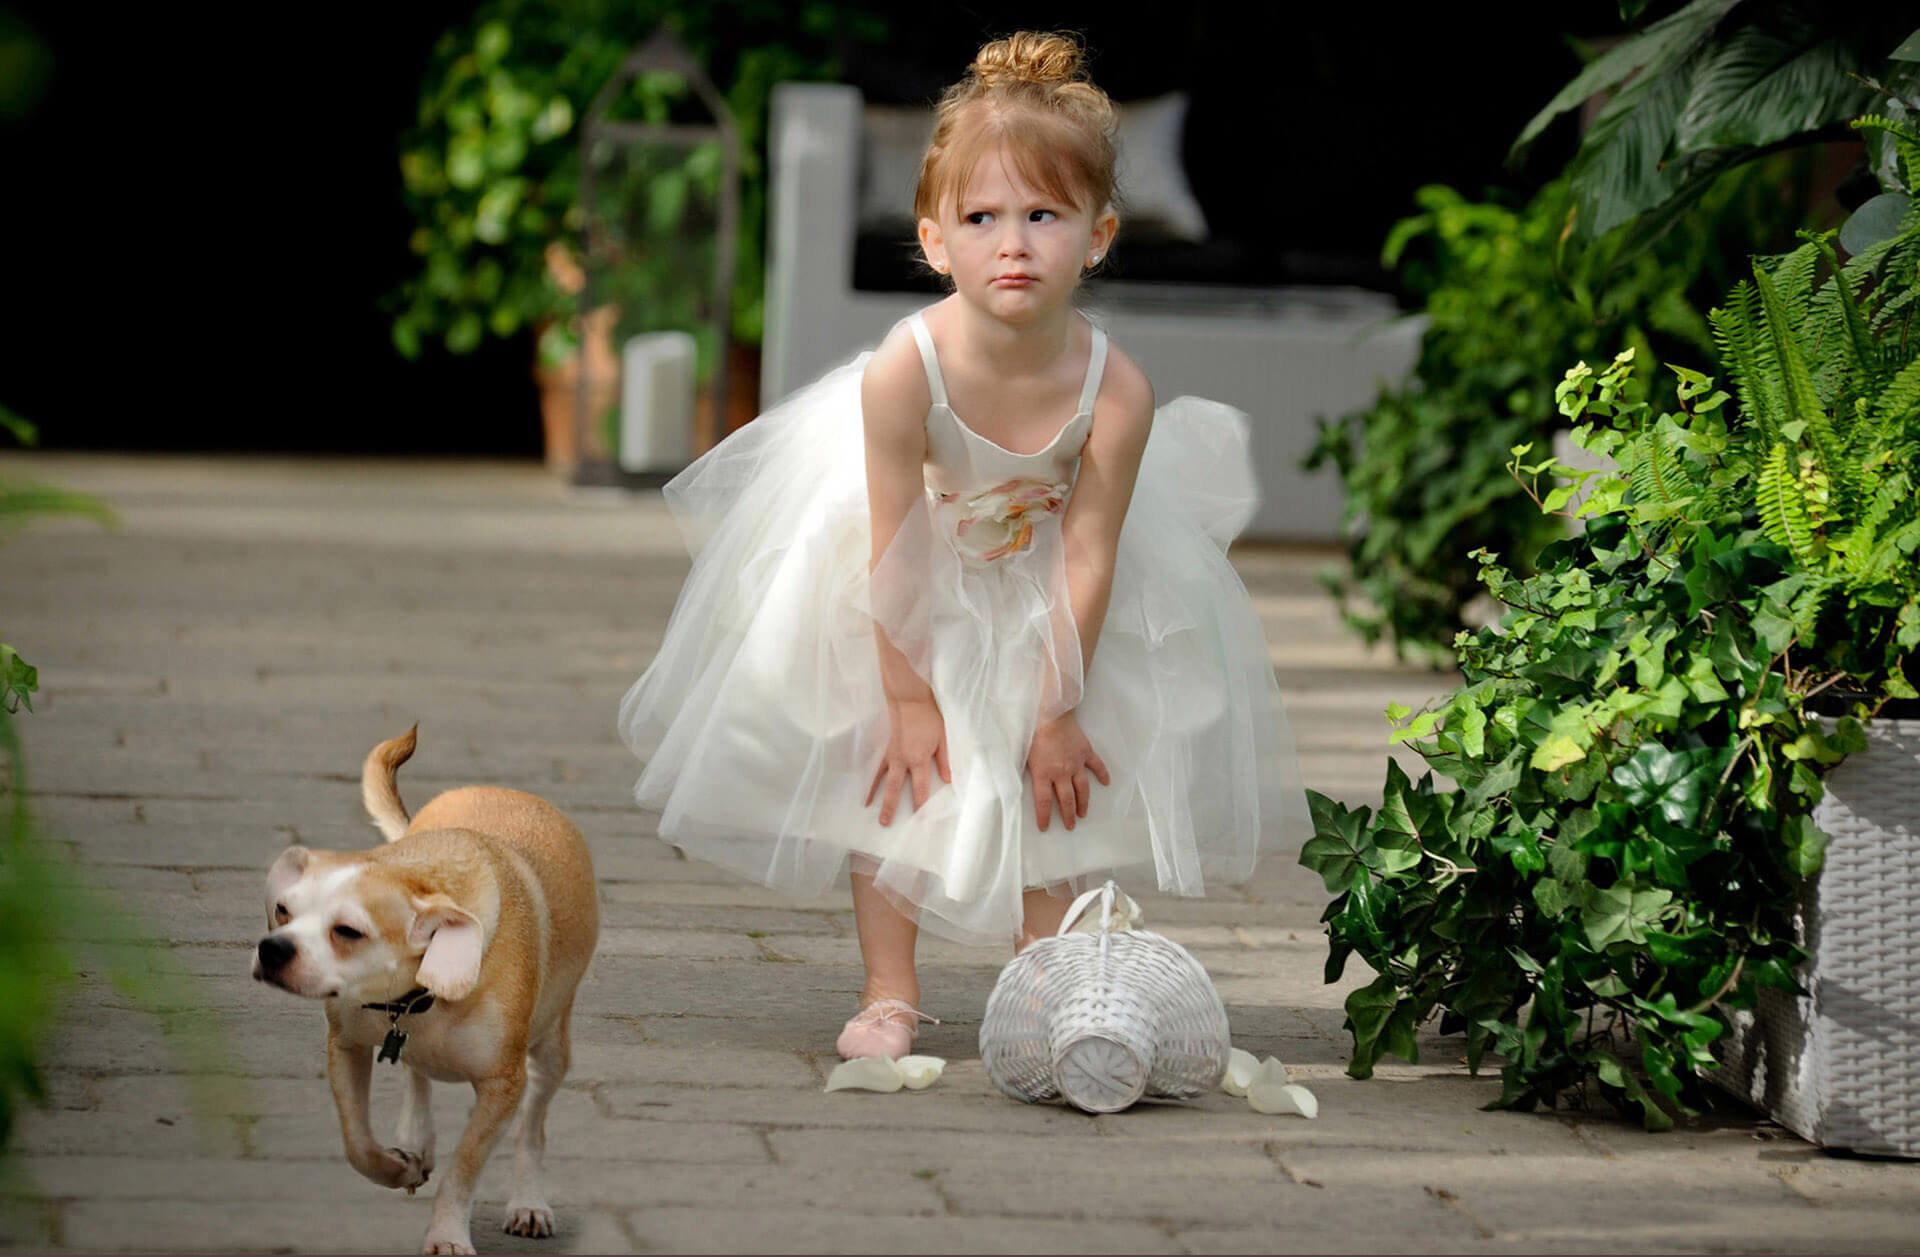 As a photojournalist, I always focus on the emotions of the wedding day, like the flowergirl getting upset after her flowers spilled when a dog distracted her during a wedding in Planterra in West Bloomfield, Michigan. Voted a favorite Michigan wedding photojournalist for capturing candid moments like this is what I do best.